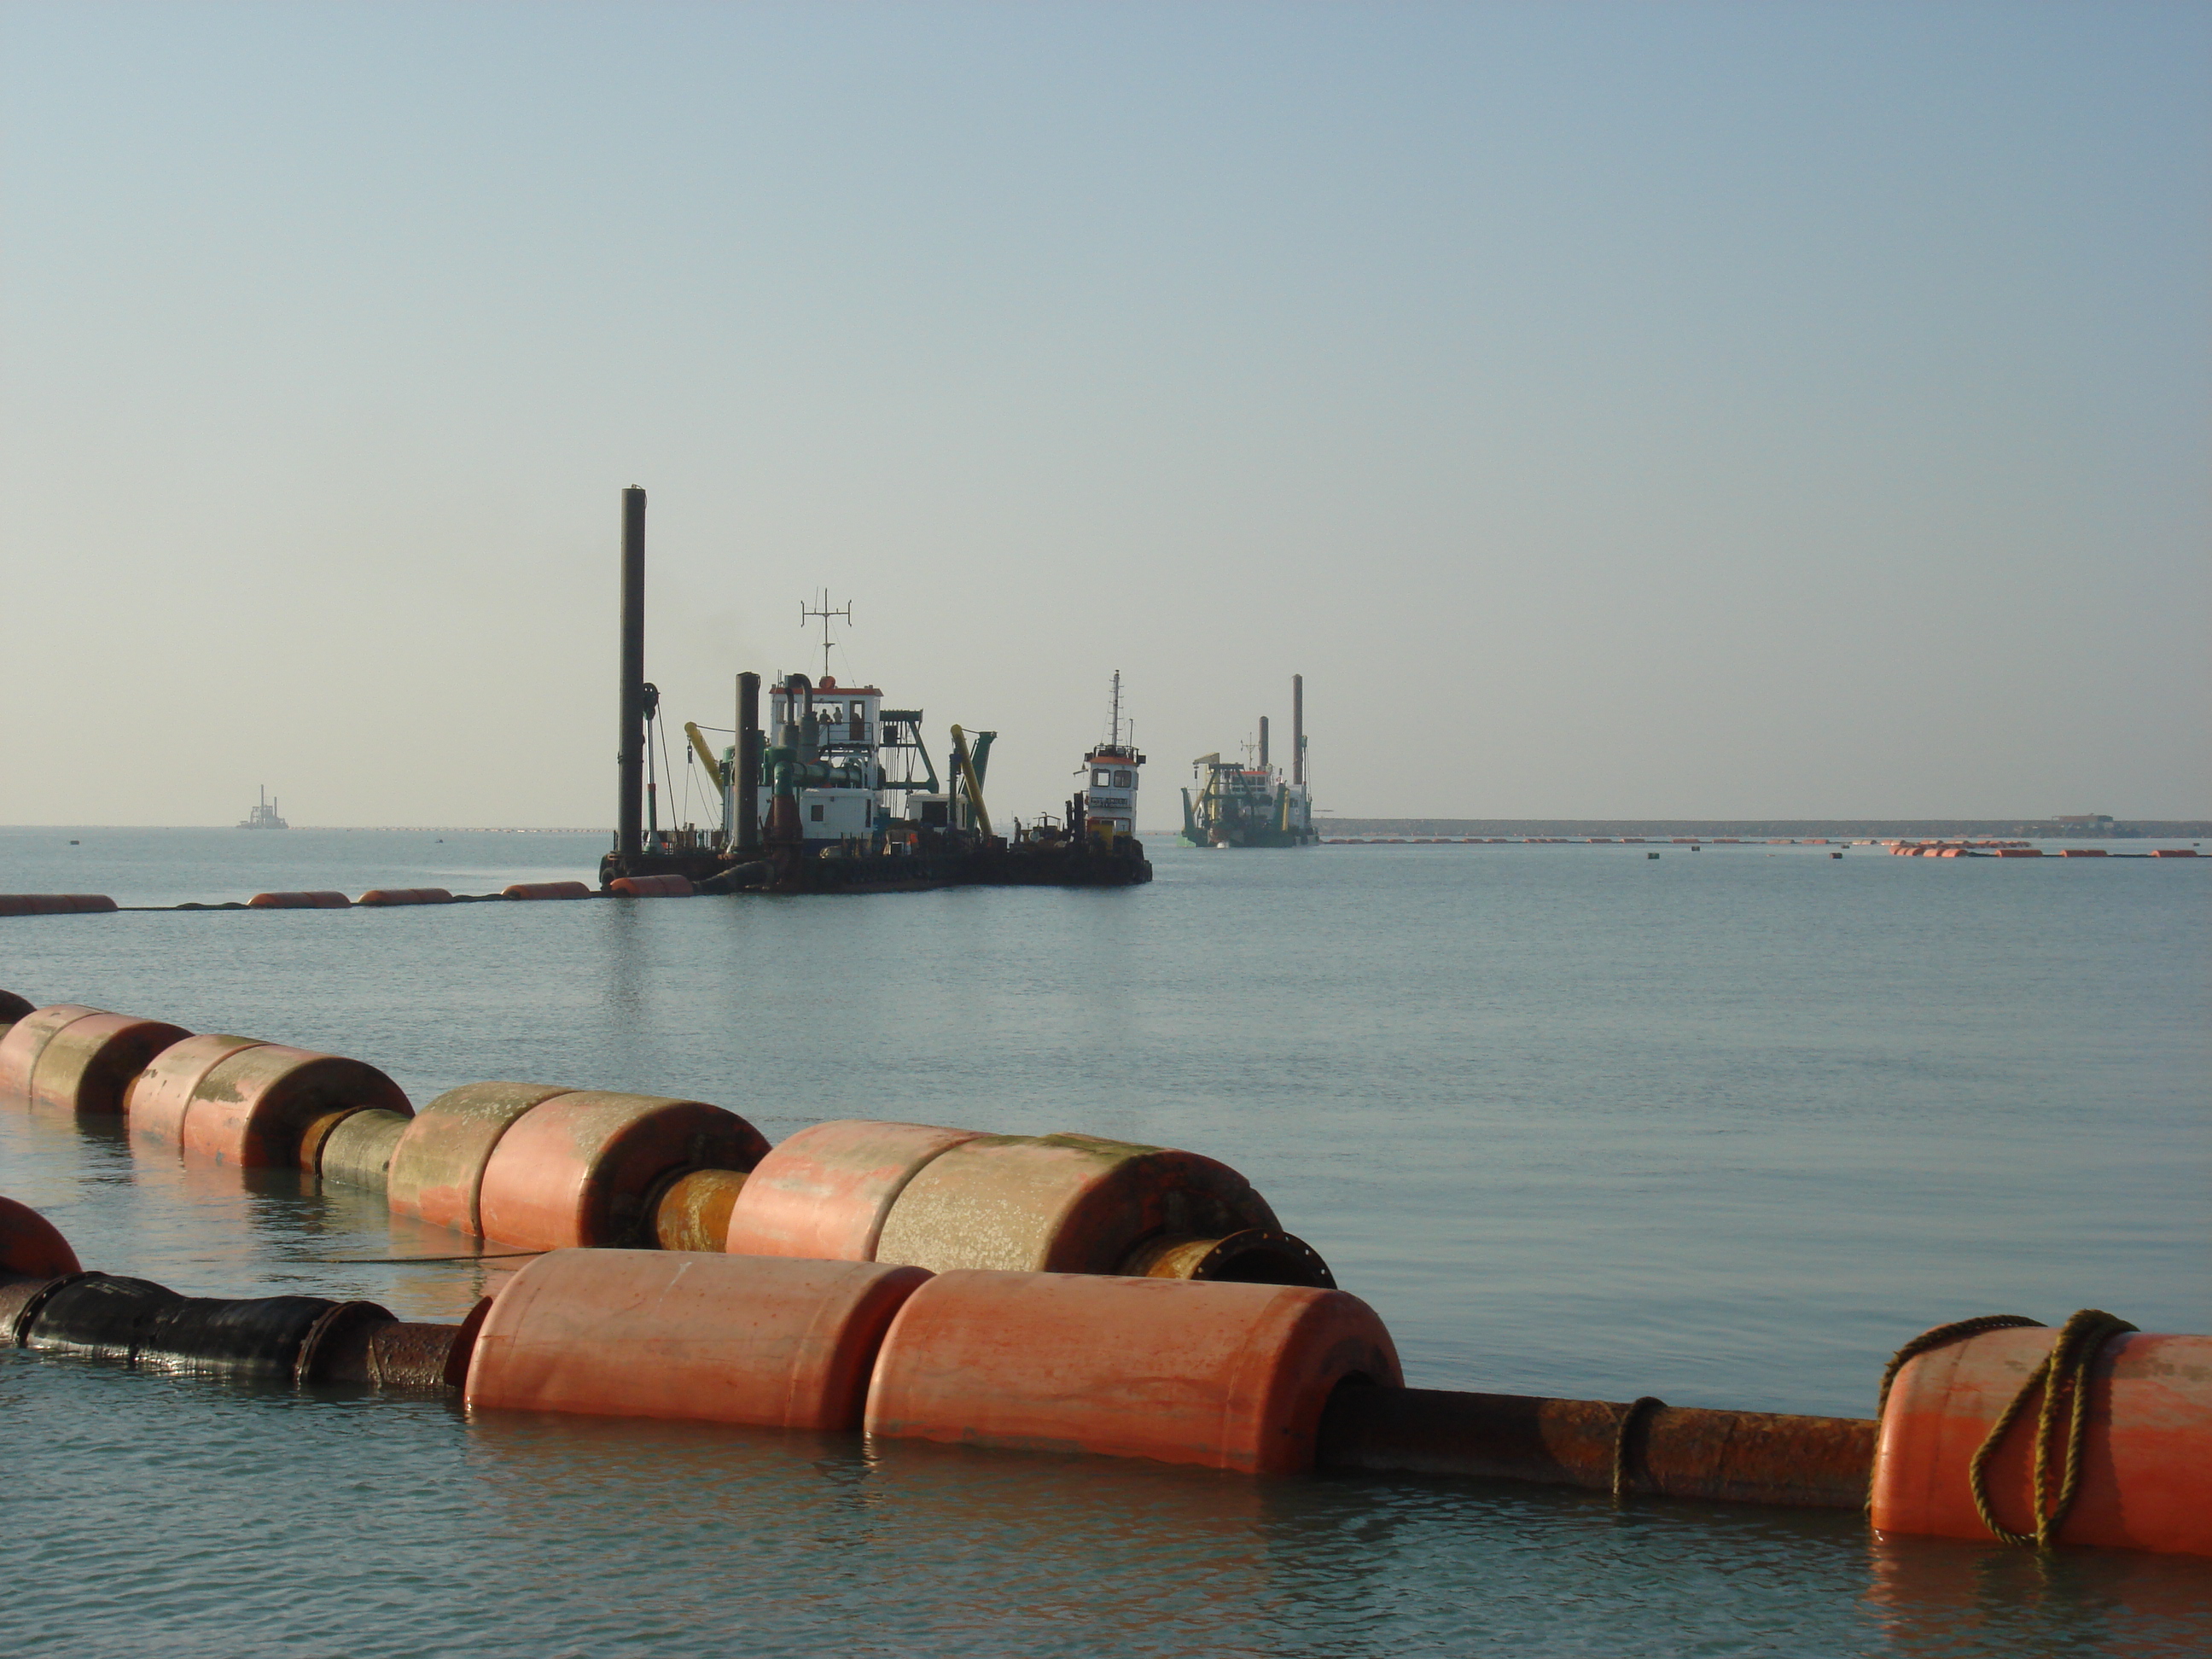 Two cutter suction dredger shore pumping soil to create new land